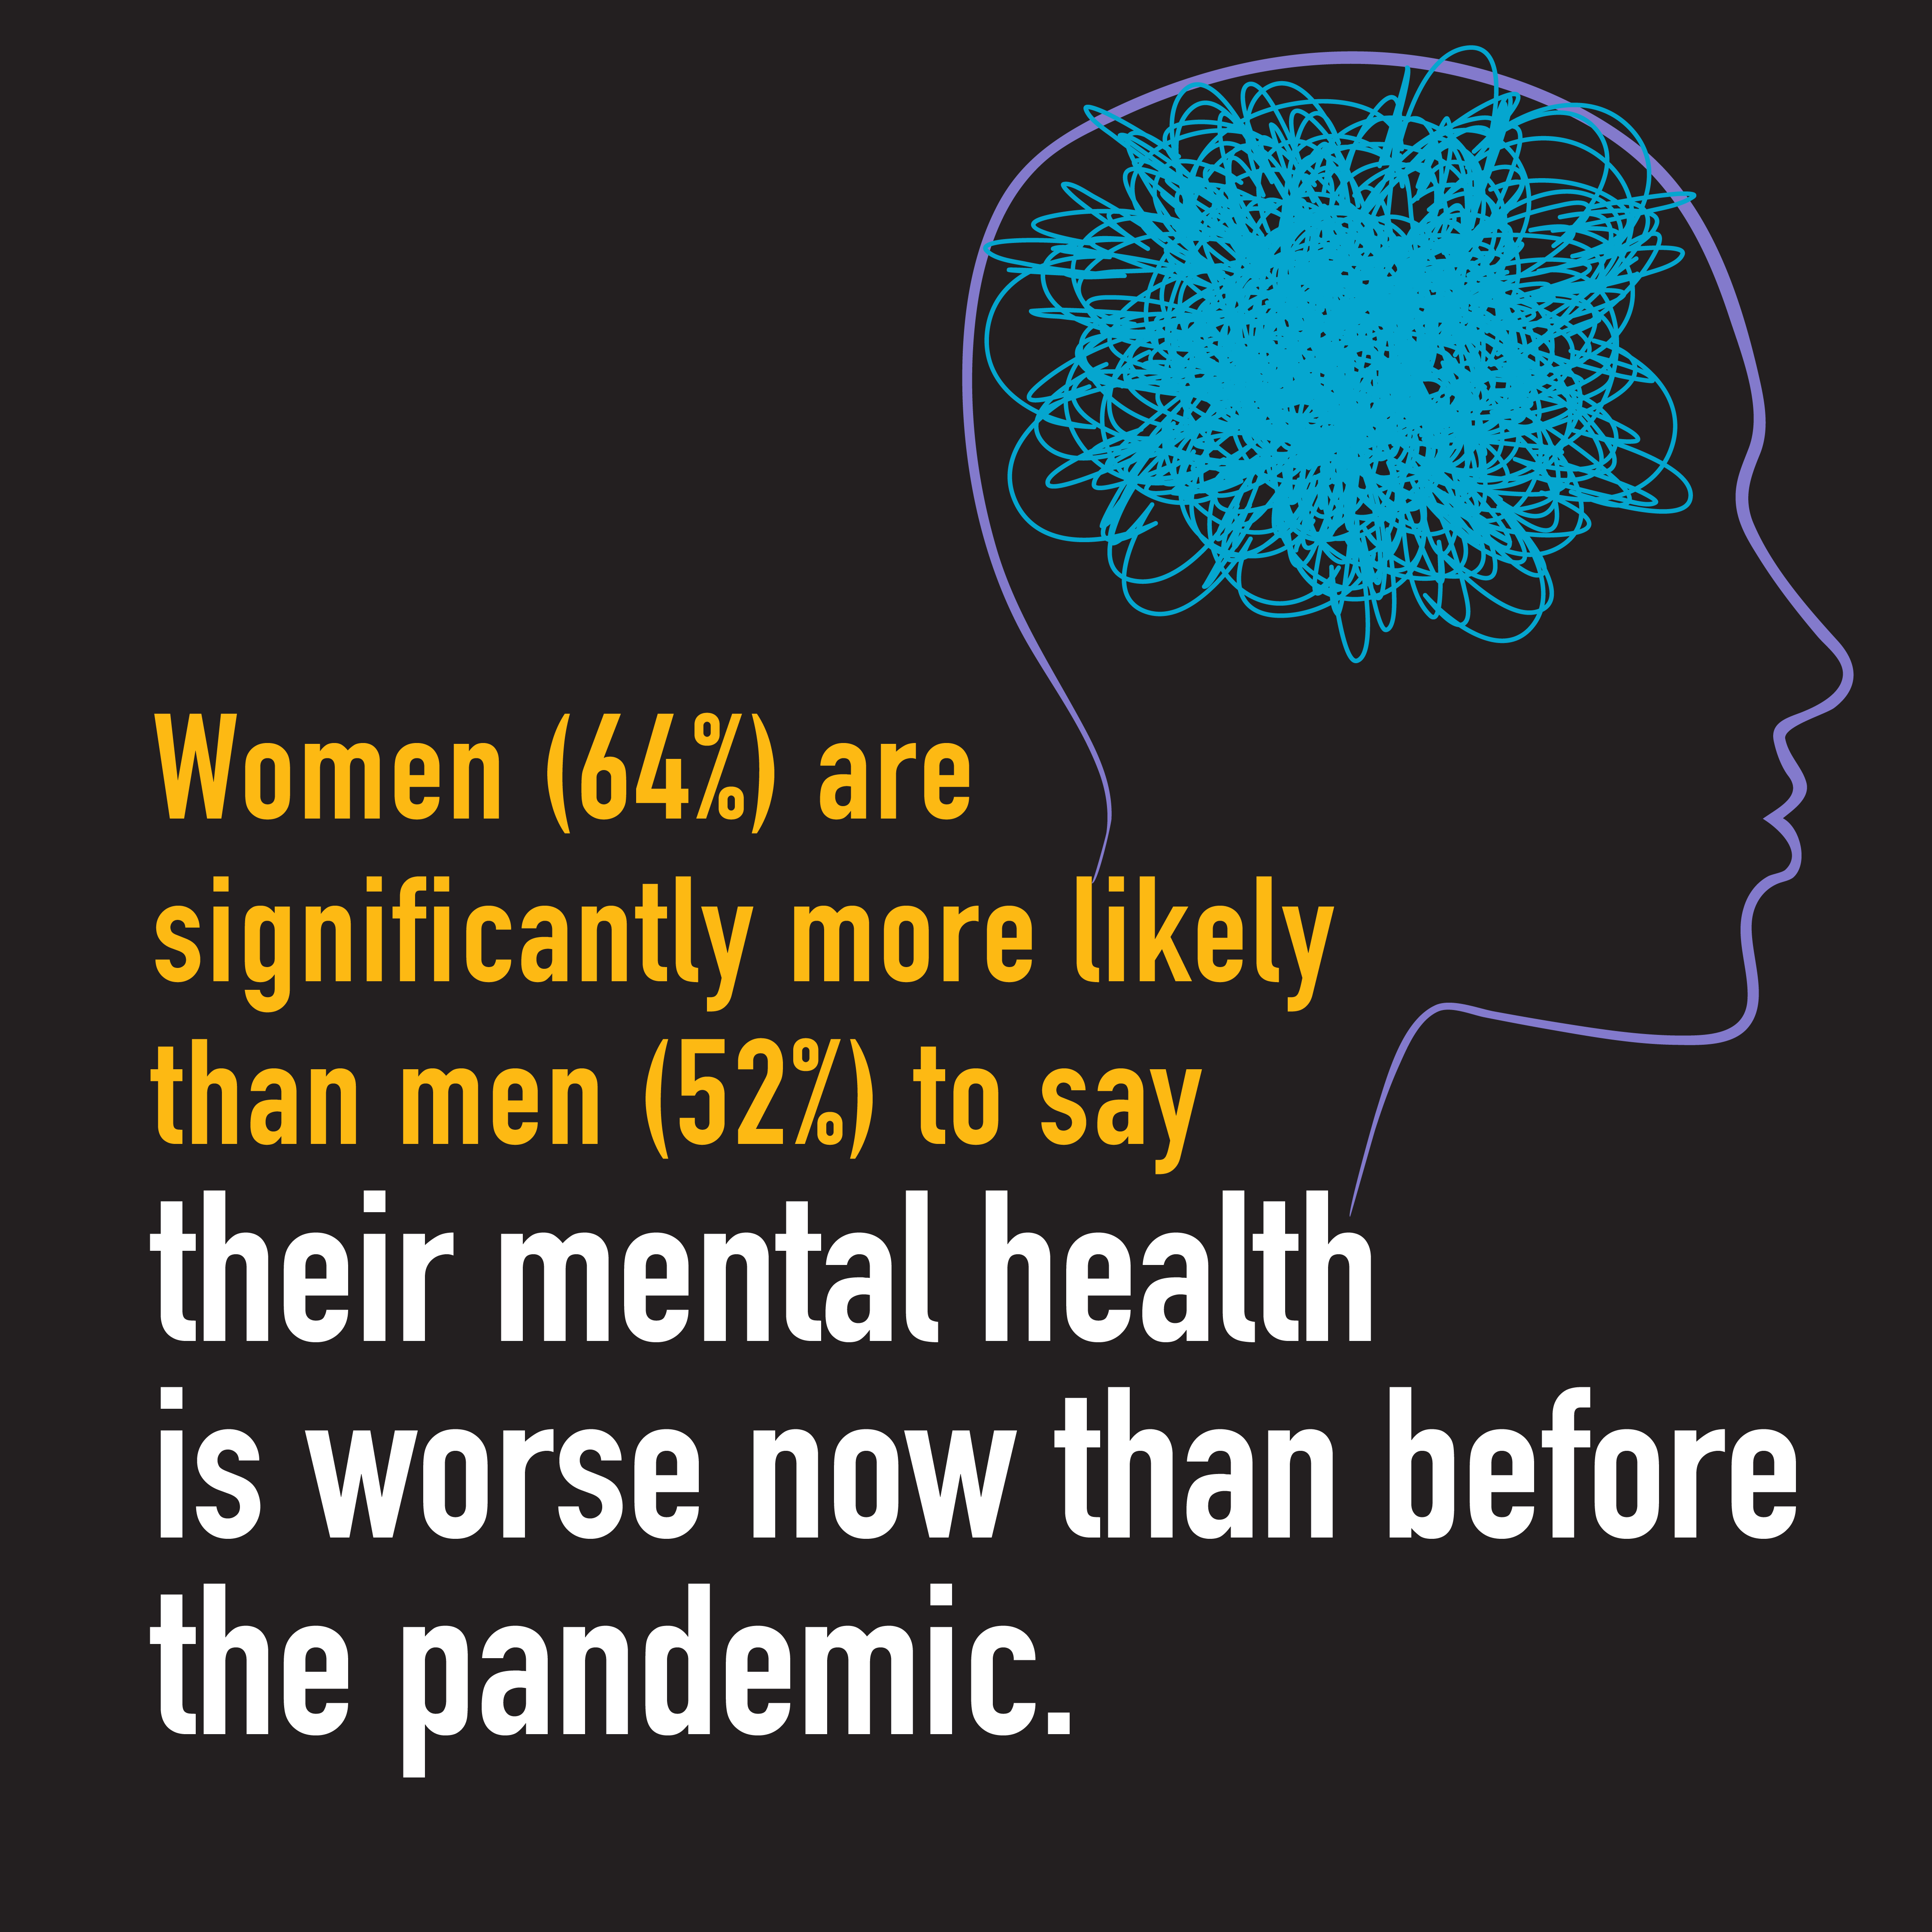 Women (64%) are significantly more likely than men (52%) to say their mental health is worse now than before the pandemic